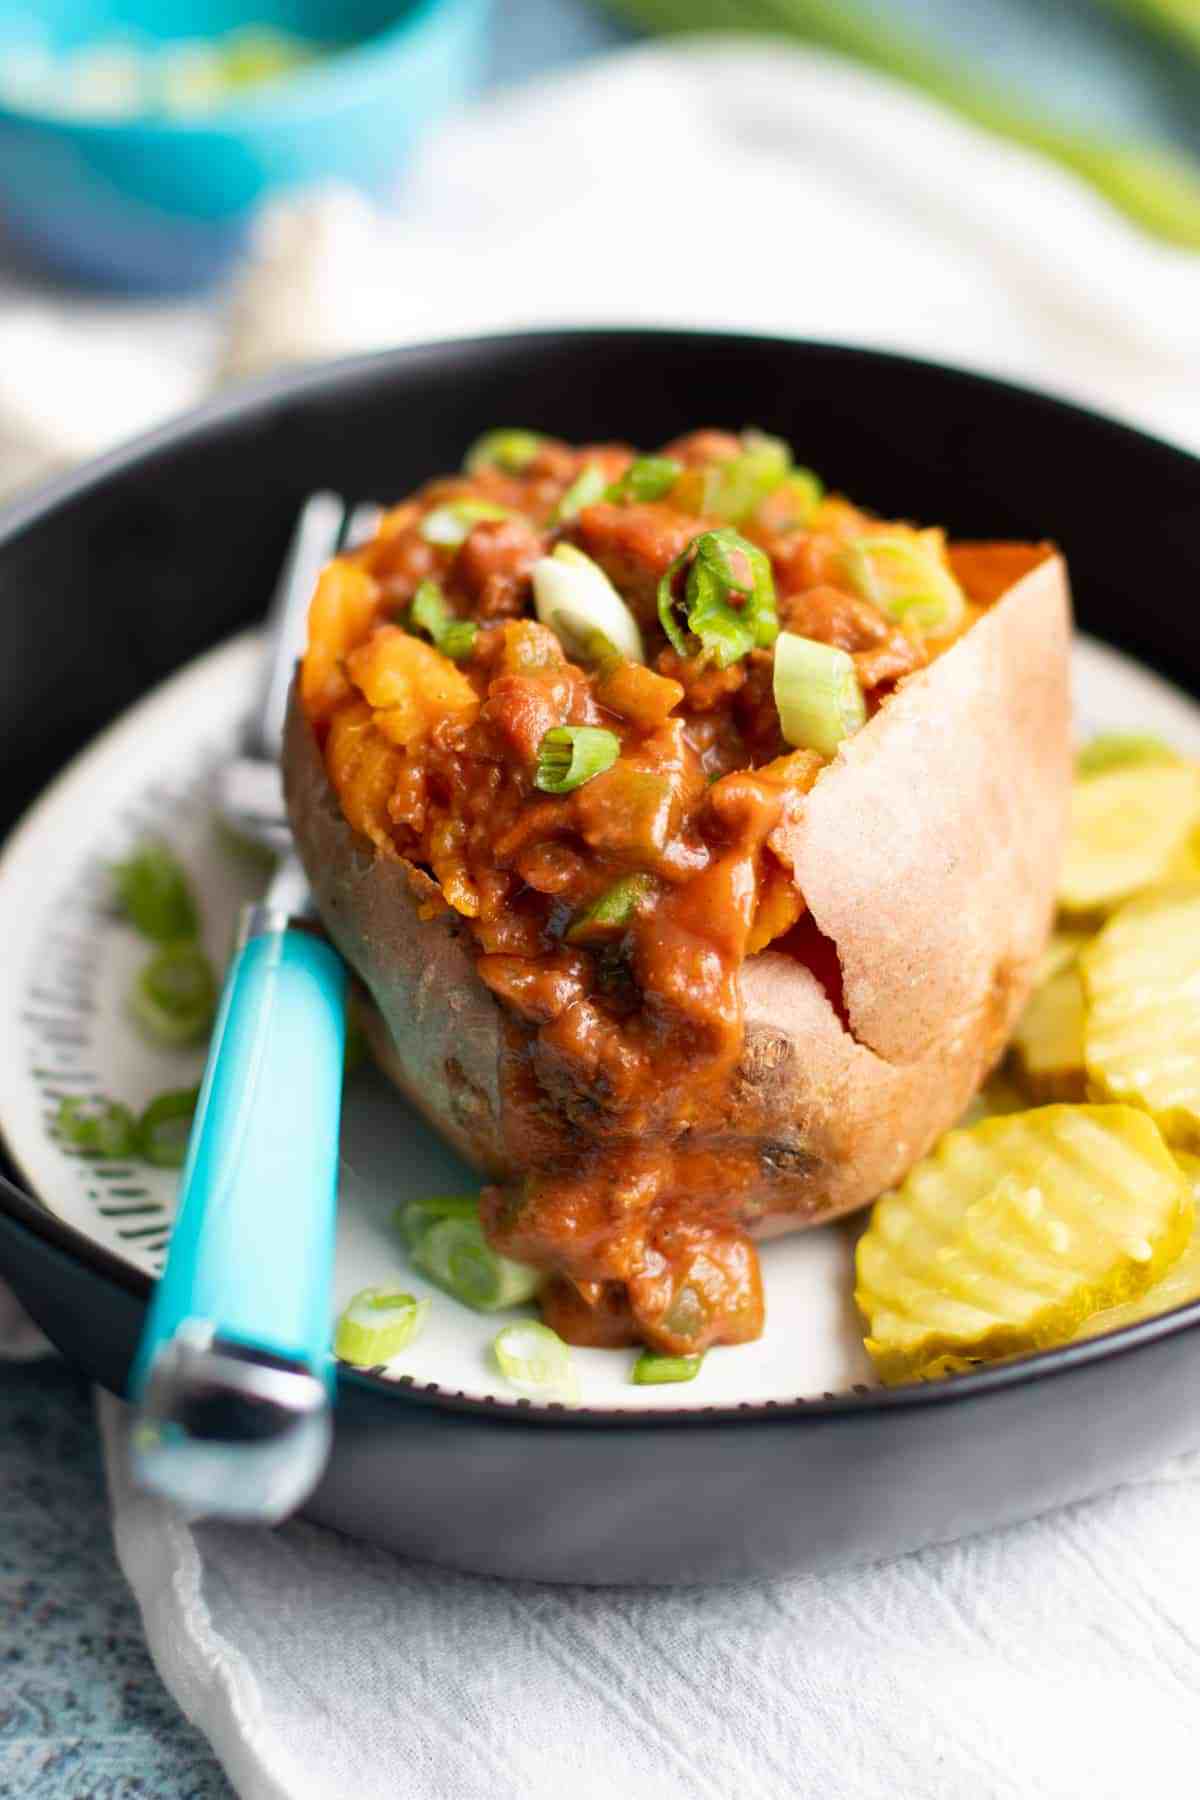 Sloppy Joes Stuffed Sweet Potatoeon a plate with a fork and some sliced pickles.